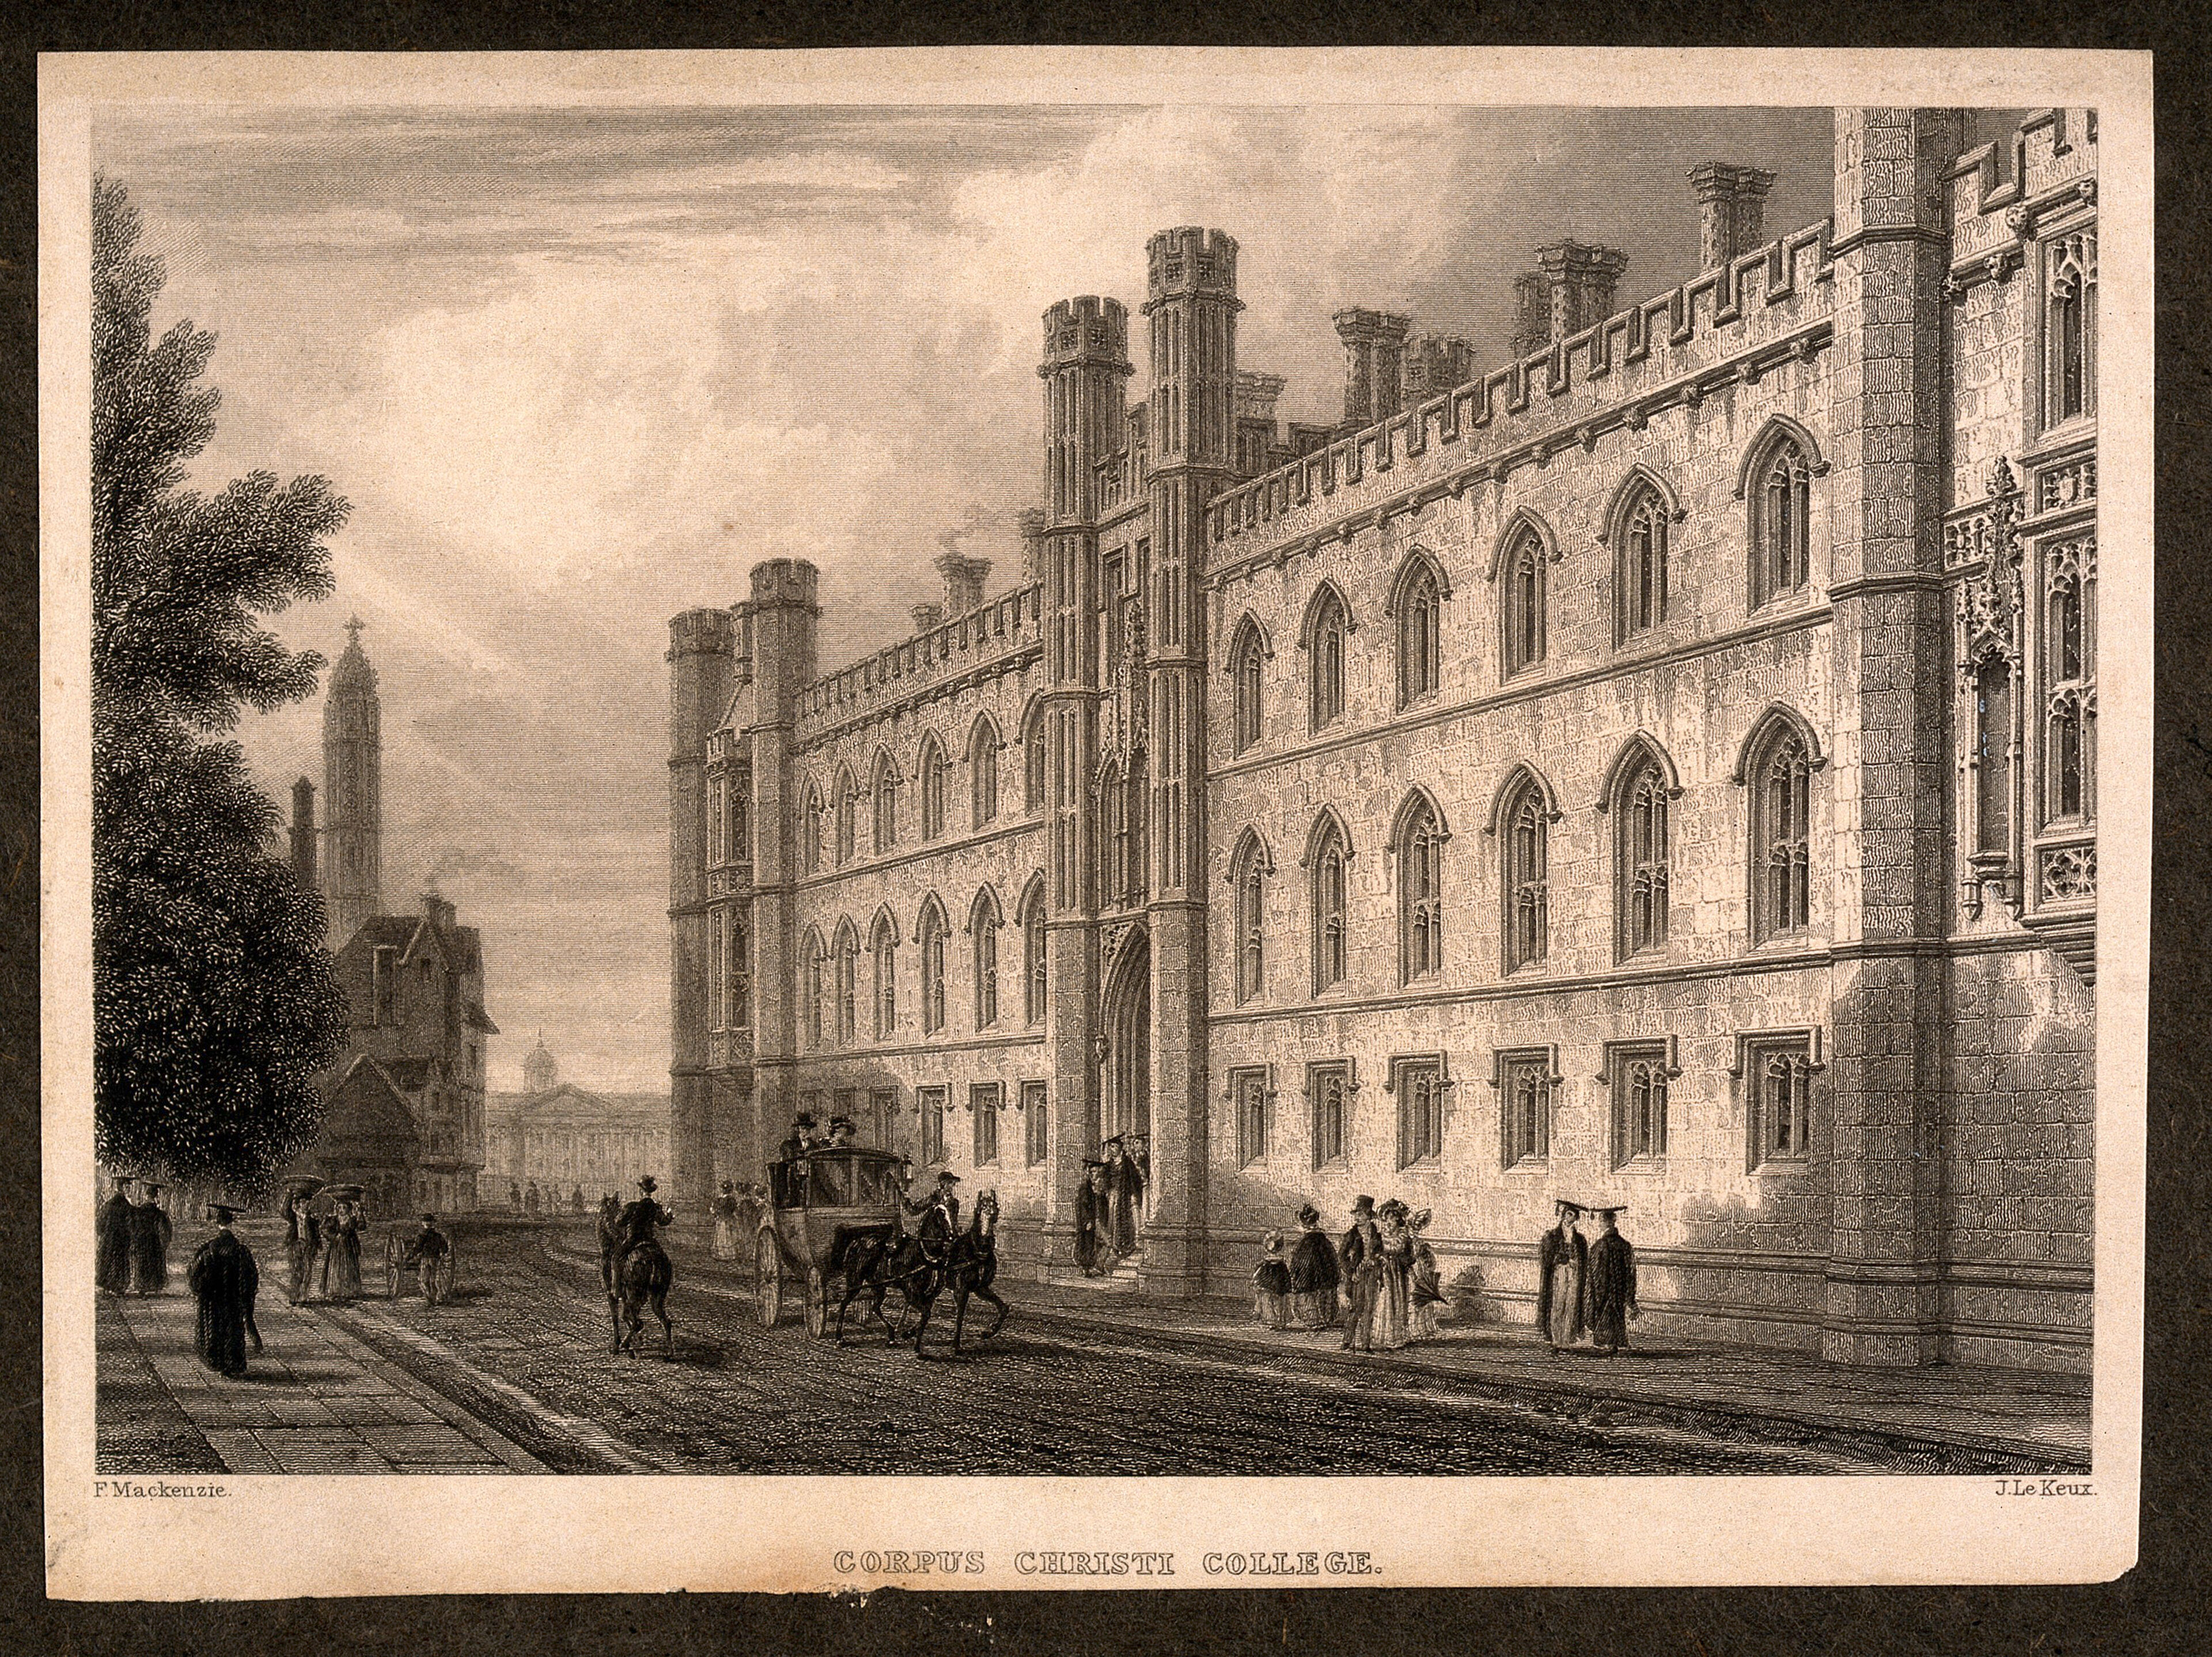 Corpus Christi college and the street life outside, Cambridge. Line engraving by J. Le Keux after F. Mackenzie.